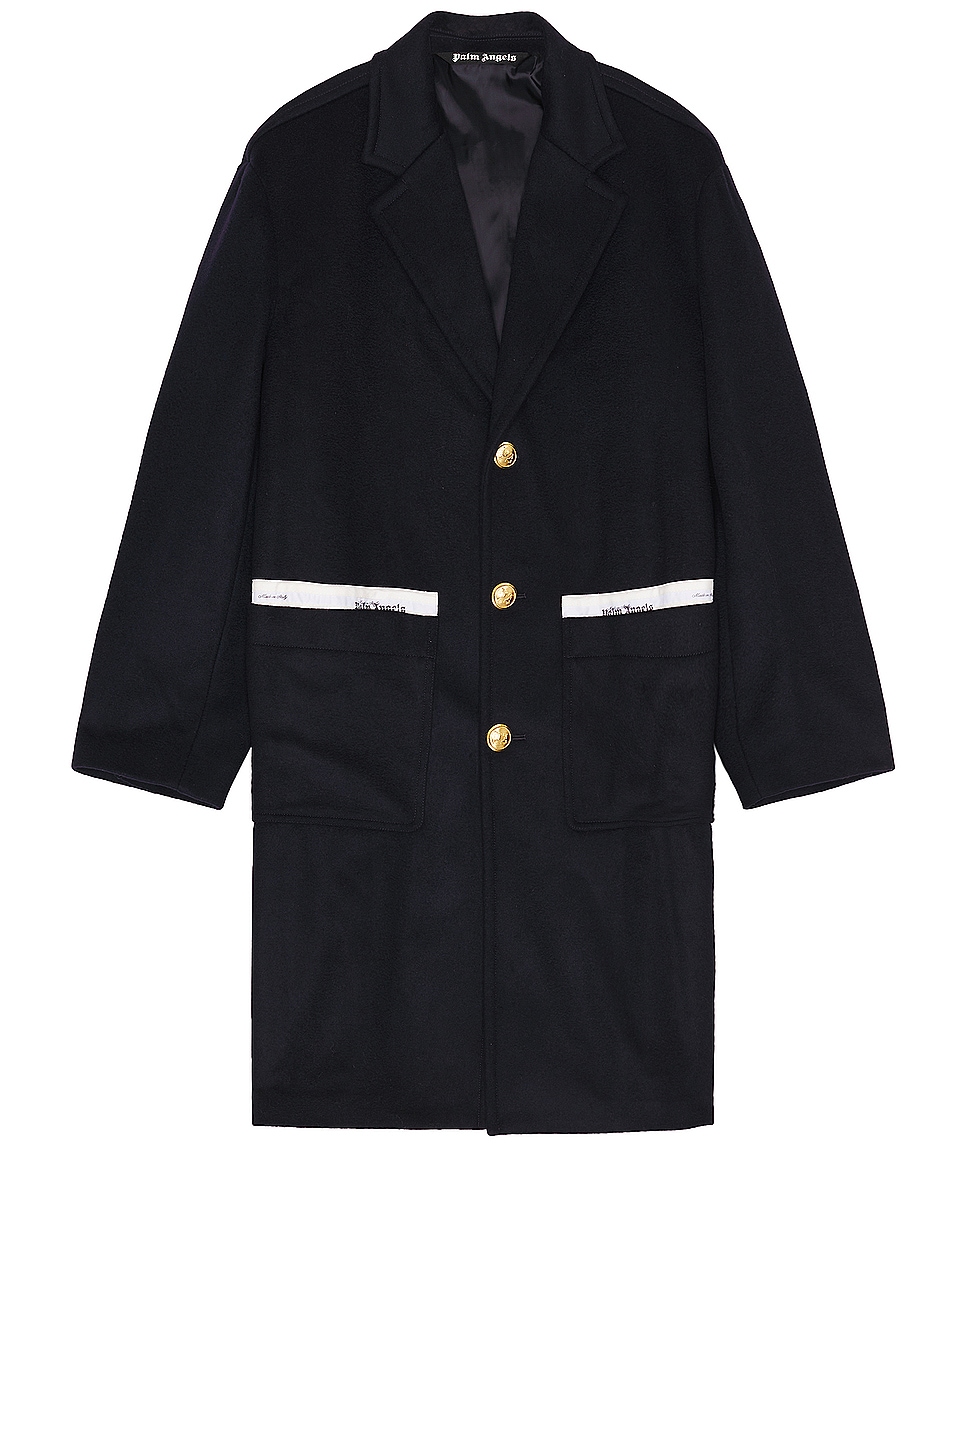 Image 1 of Palm Angels Uniform Coat in Navy Blue